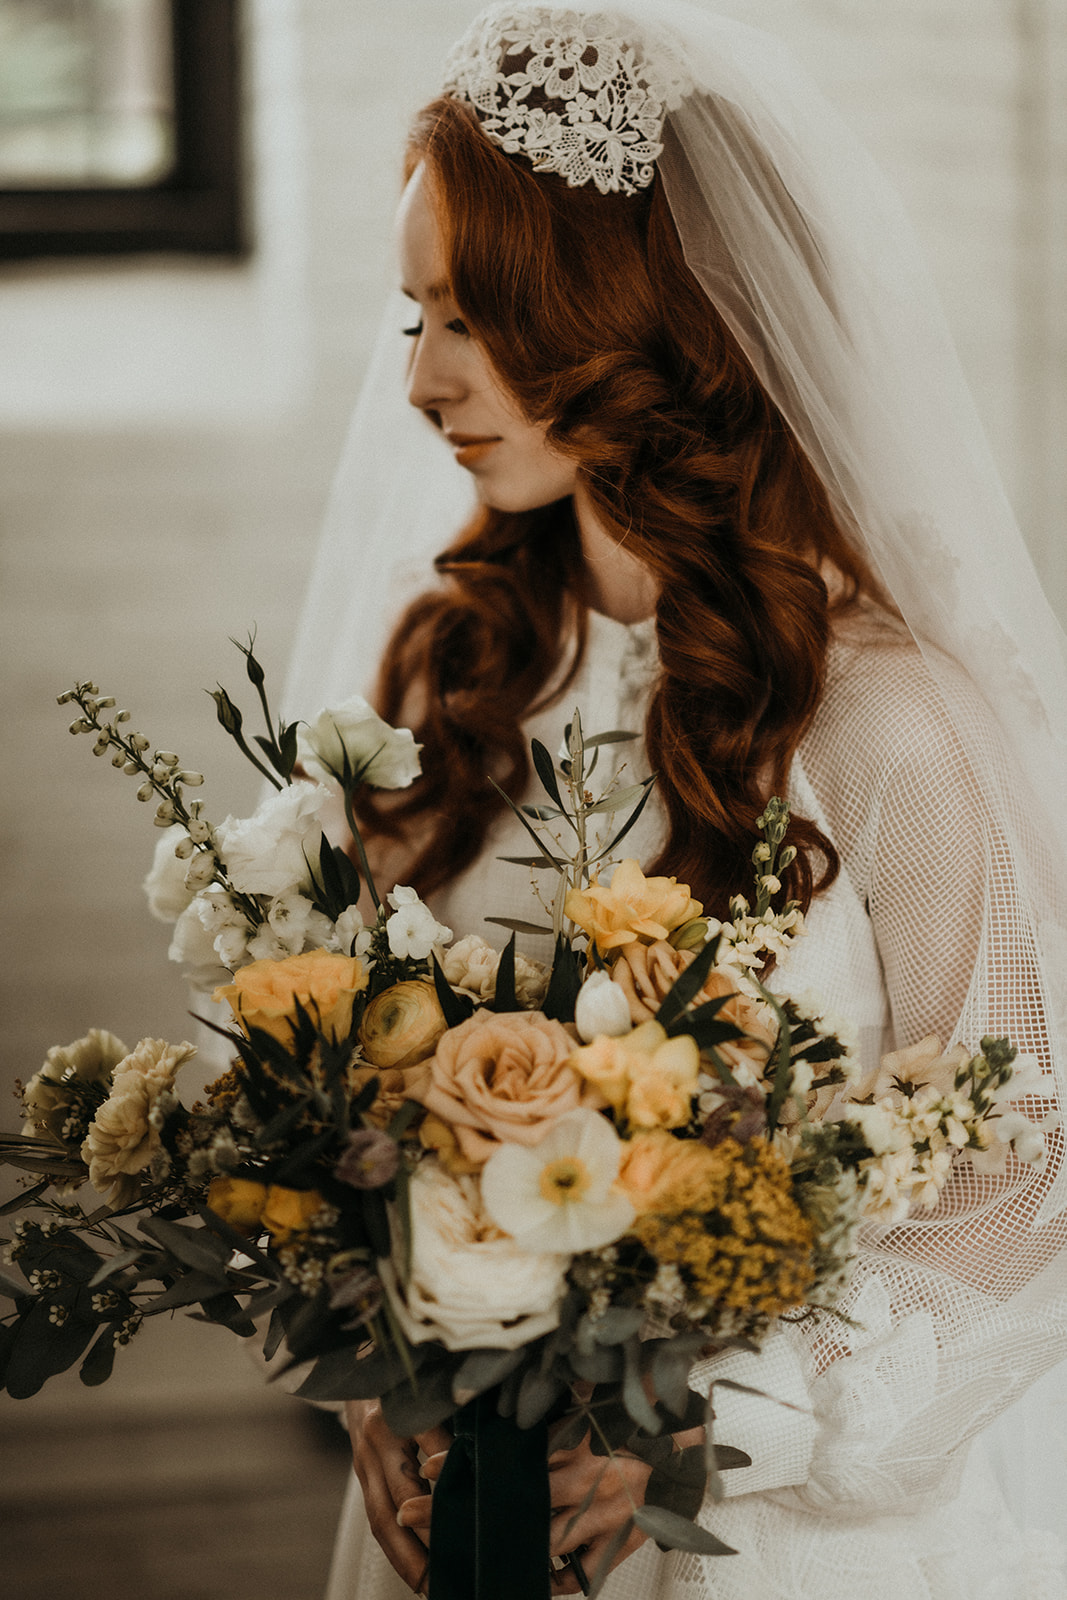 Moody vintage wedding ideas inspired by The Queen's Gambit